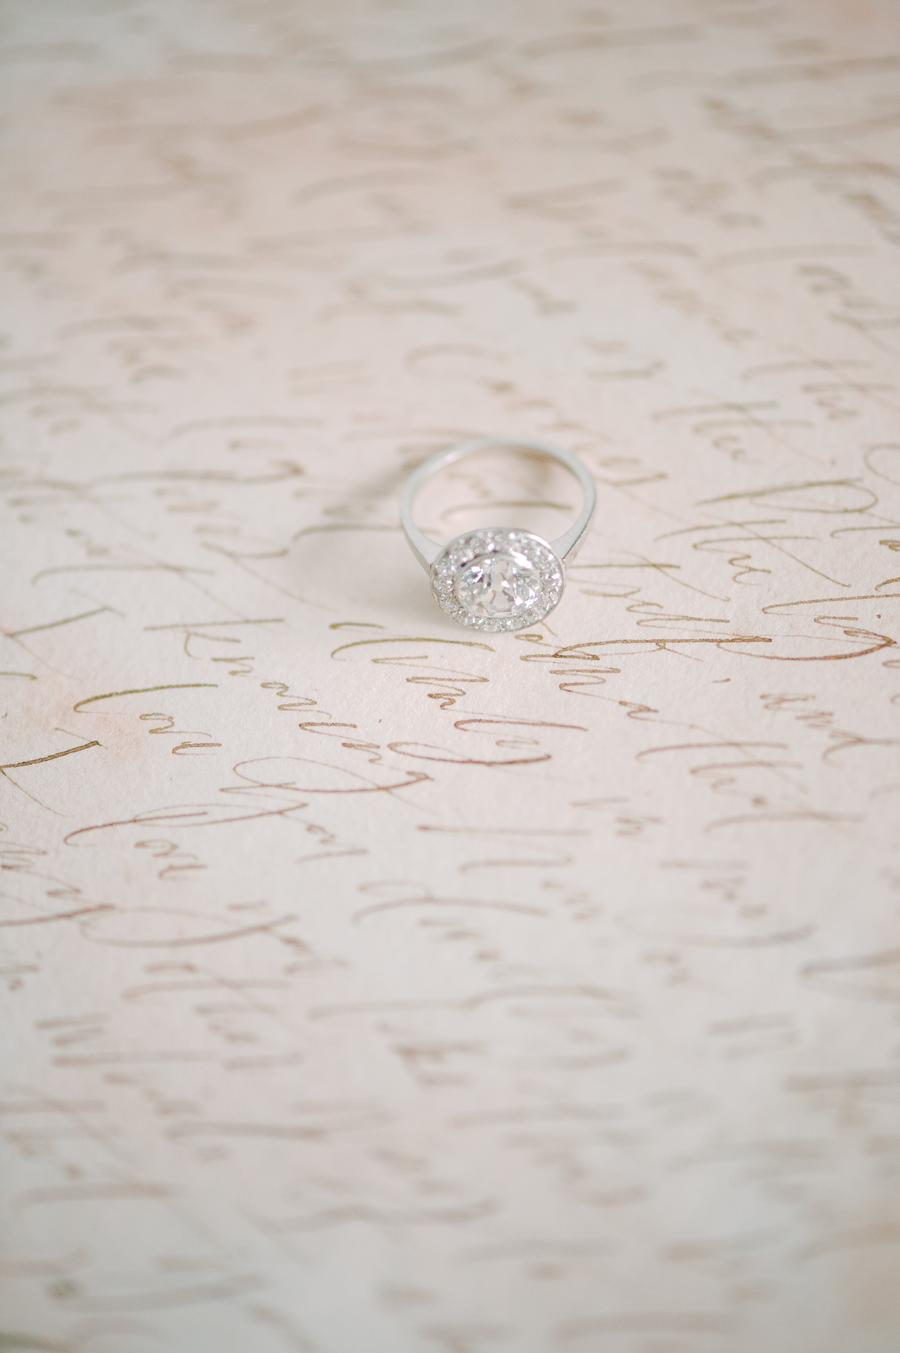 Fine art wedding calligraphy with a round antique engagement ring and diamond halo | Photo by Julie Livingston with planning + design by Willow and Oak Events